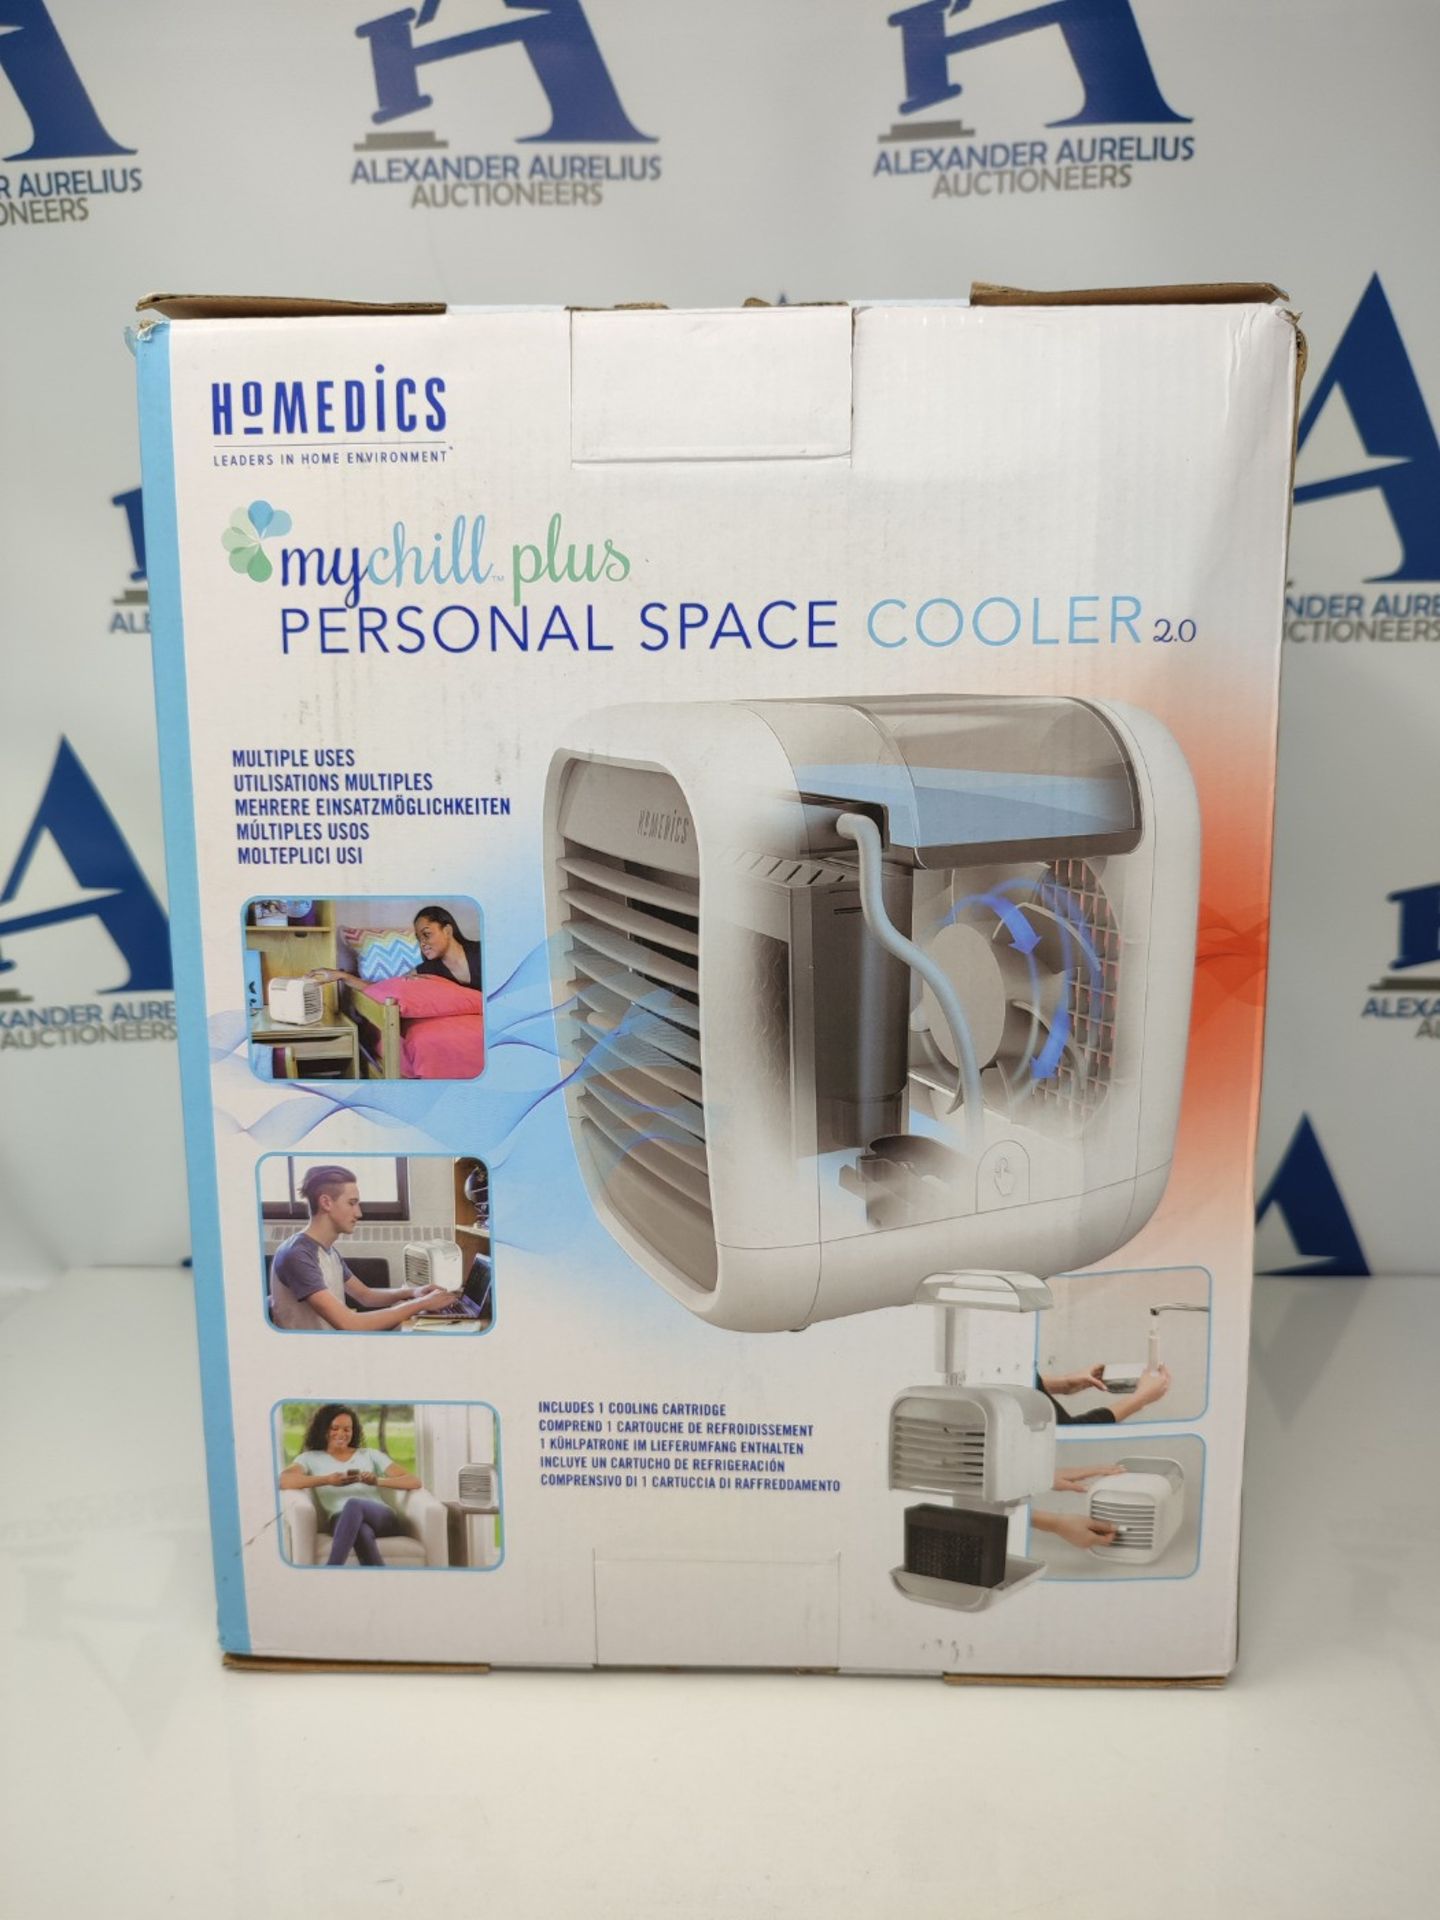 HoMedics PAC-35WT-EU2 Personal Space Cooler, MyChill Plus, 1.8 Metre Cooling Area, 3 S - Image 5 of 10